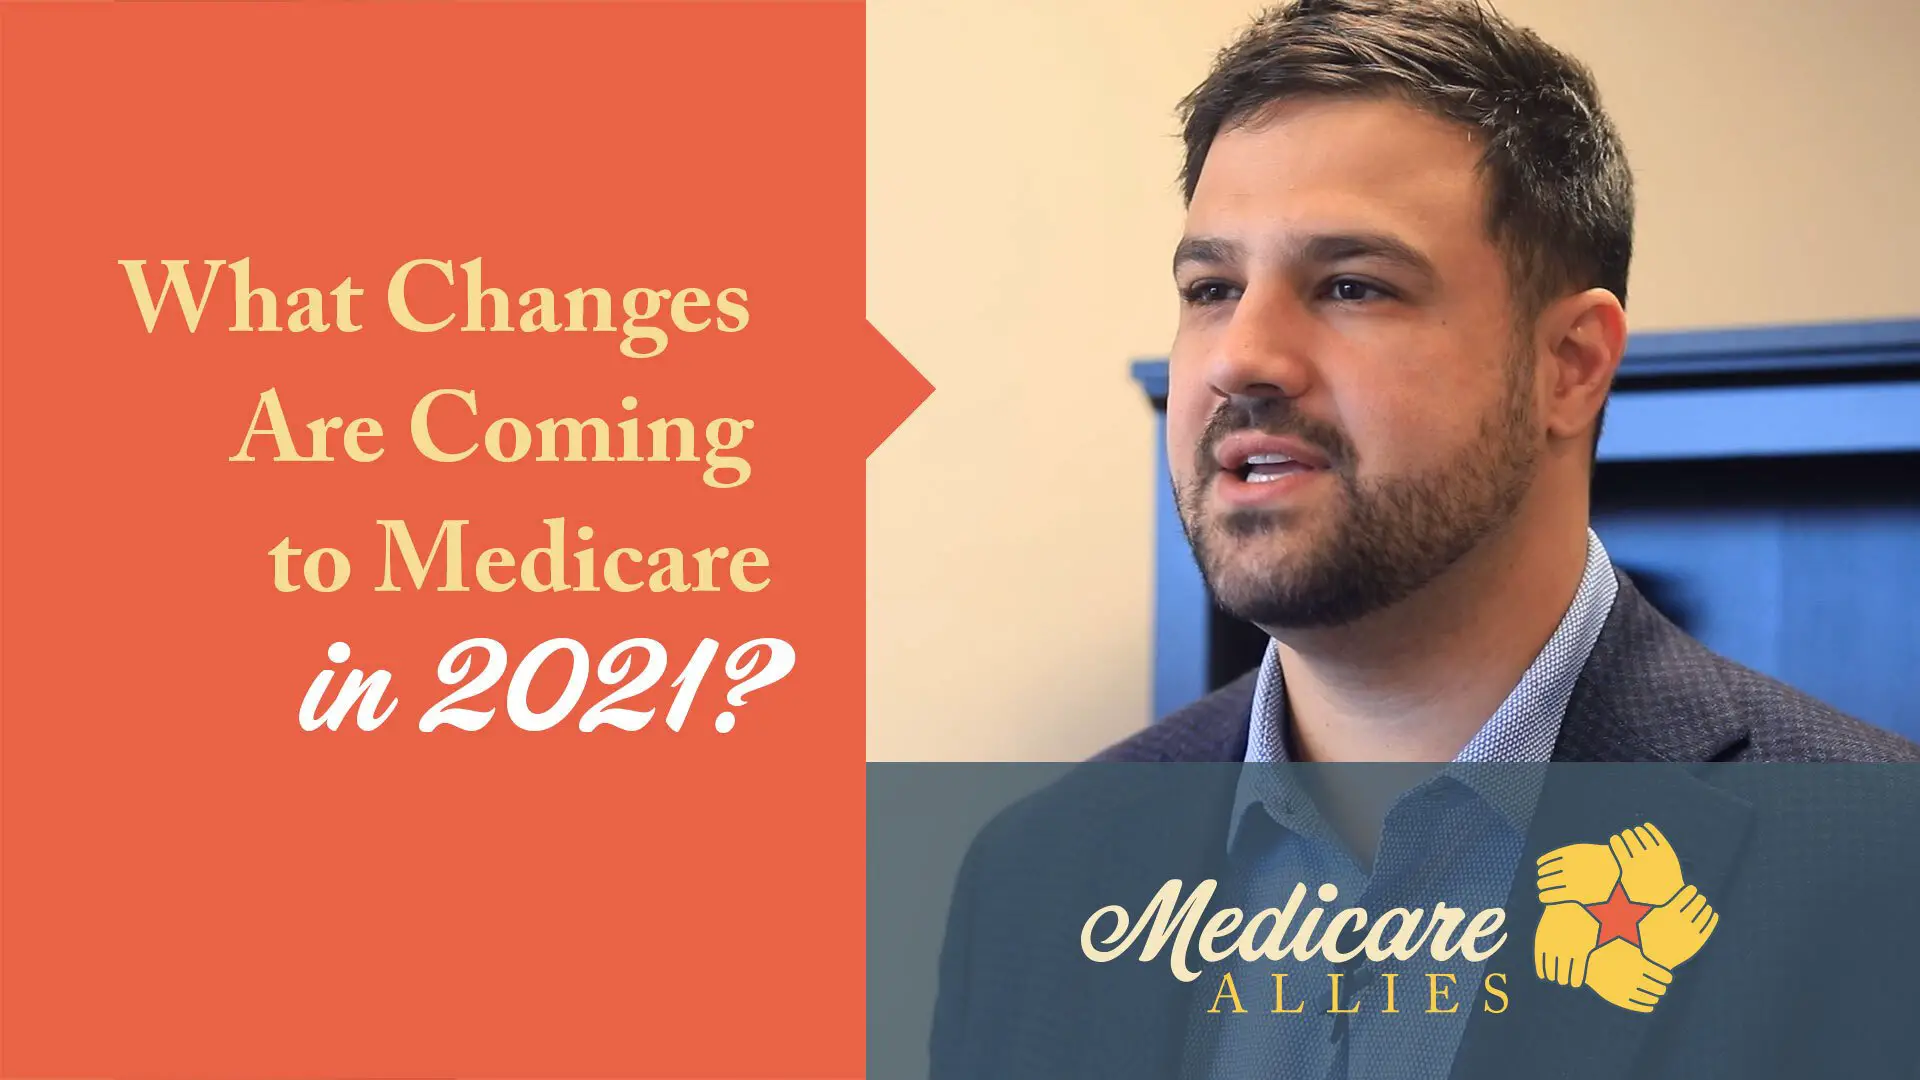 What Changes Are Coming to Medicare In 2021?